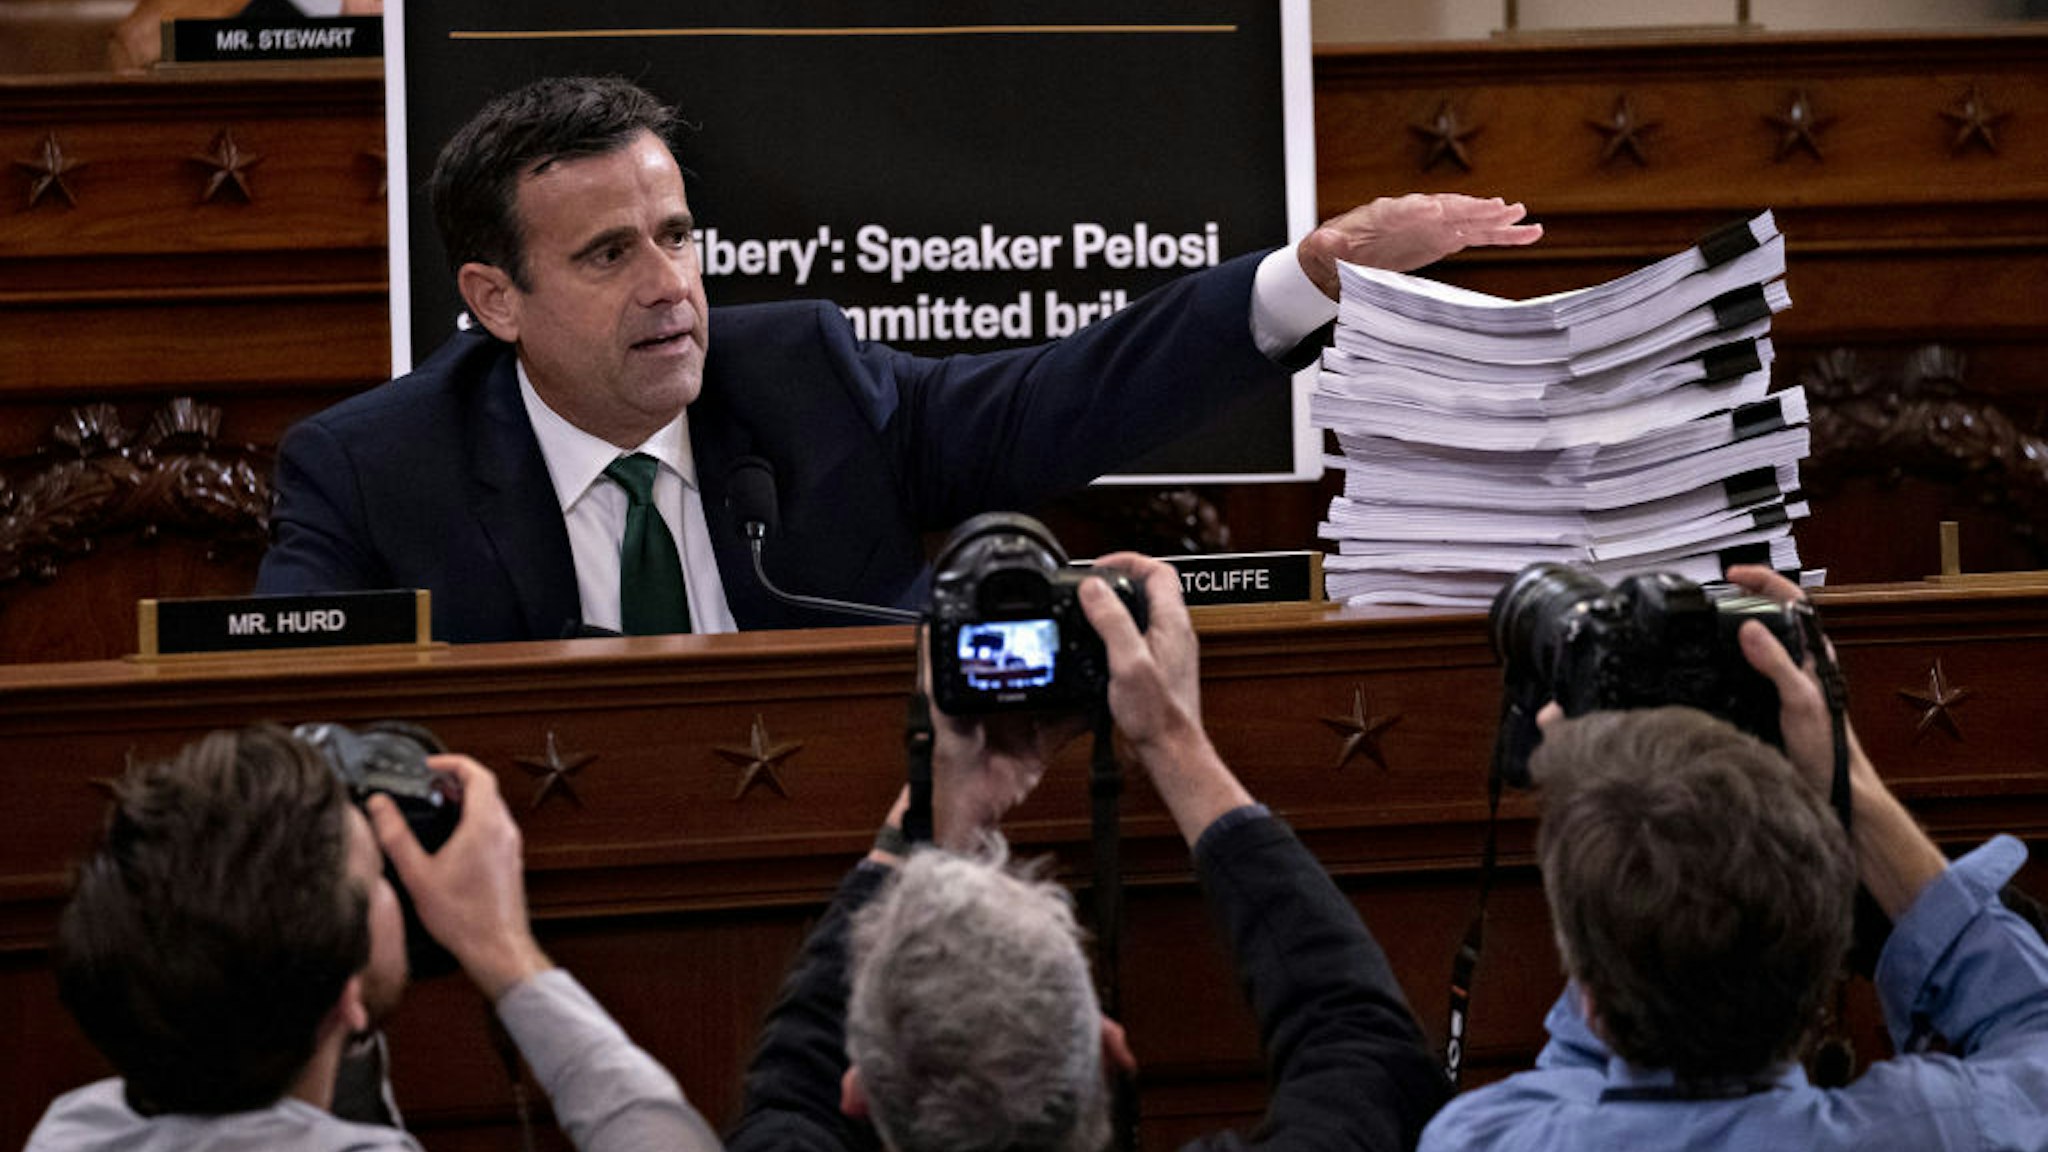 Representative John Ratcliffe, a Republican from Texas, displays a stack of sworn testimony while questioning witnesses during a House Intelligence Committee impeachment inquiry hearing in Washington, D.C., U.S., on Tuesday, Nov. 19, 2019. The committee plans to hear from eight witnesses in open hearings this week in the impeachment inquiry into President Donald Trump. Photographer: Andrew Harrer/Bloomberg